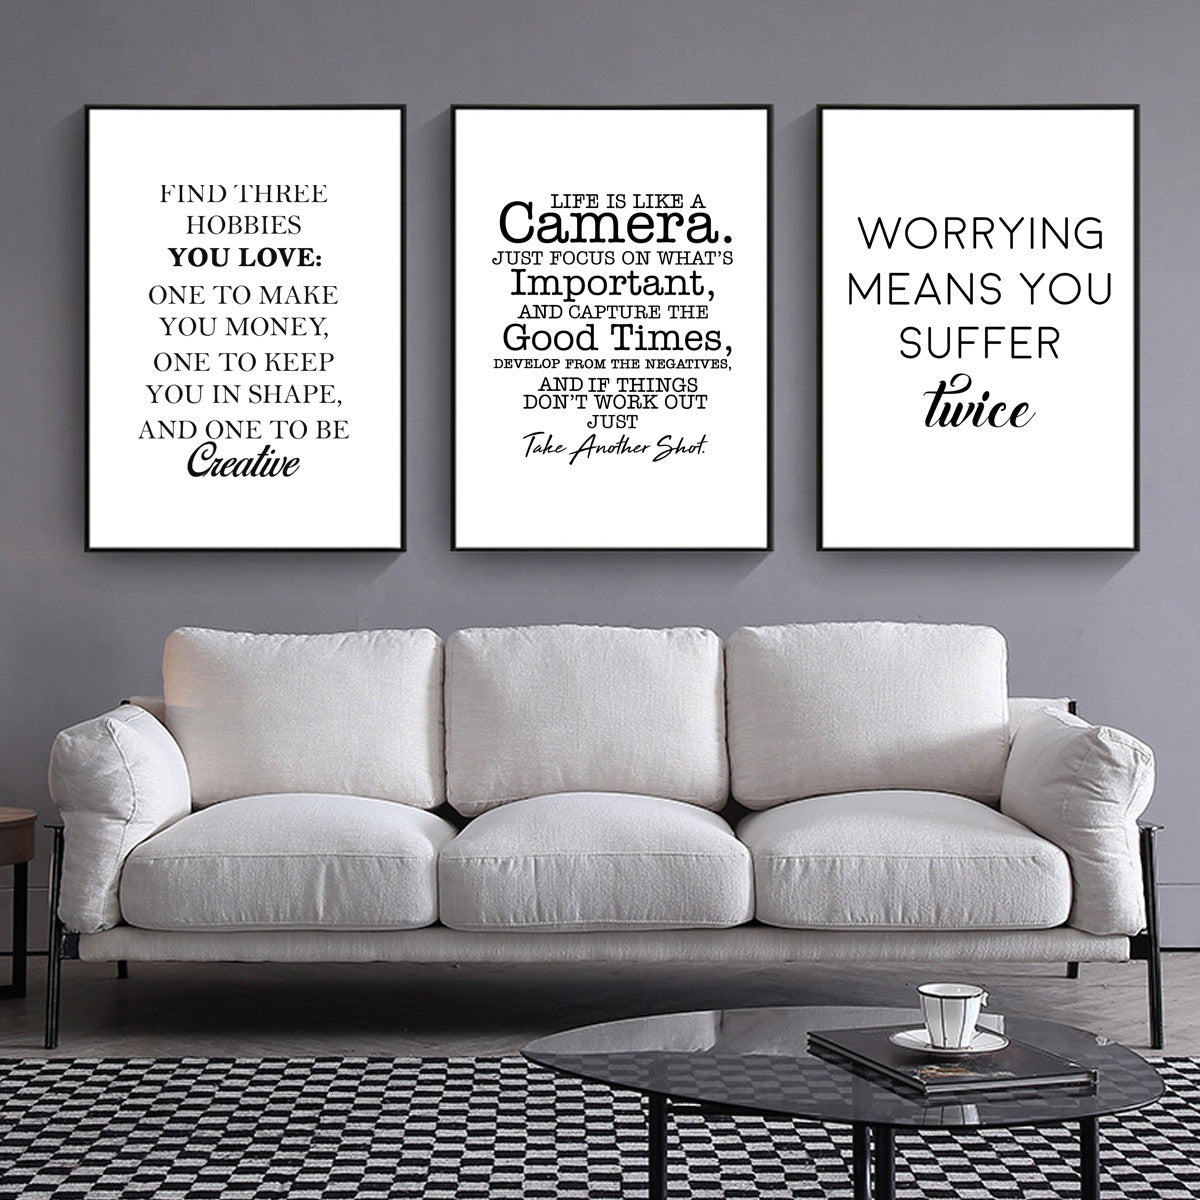 Poster Quote Canvas Painting Phrases Motivational Wall-Art Home-Decor Pictures Minimalist